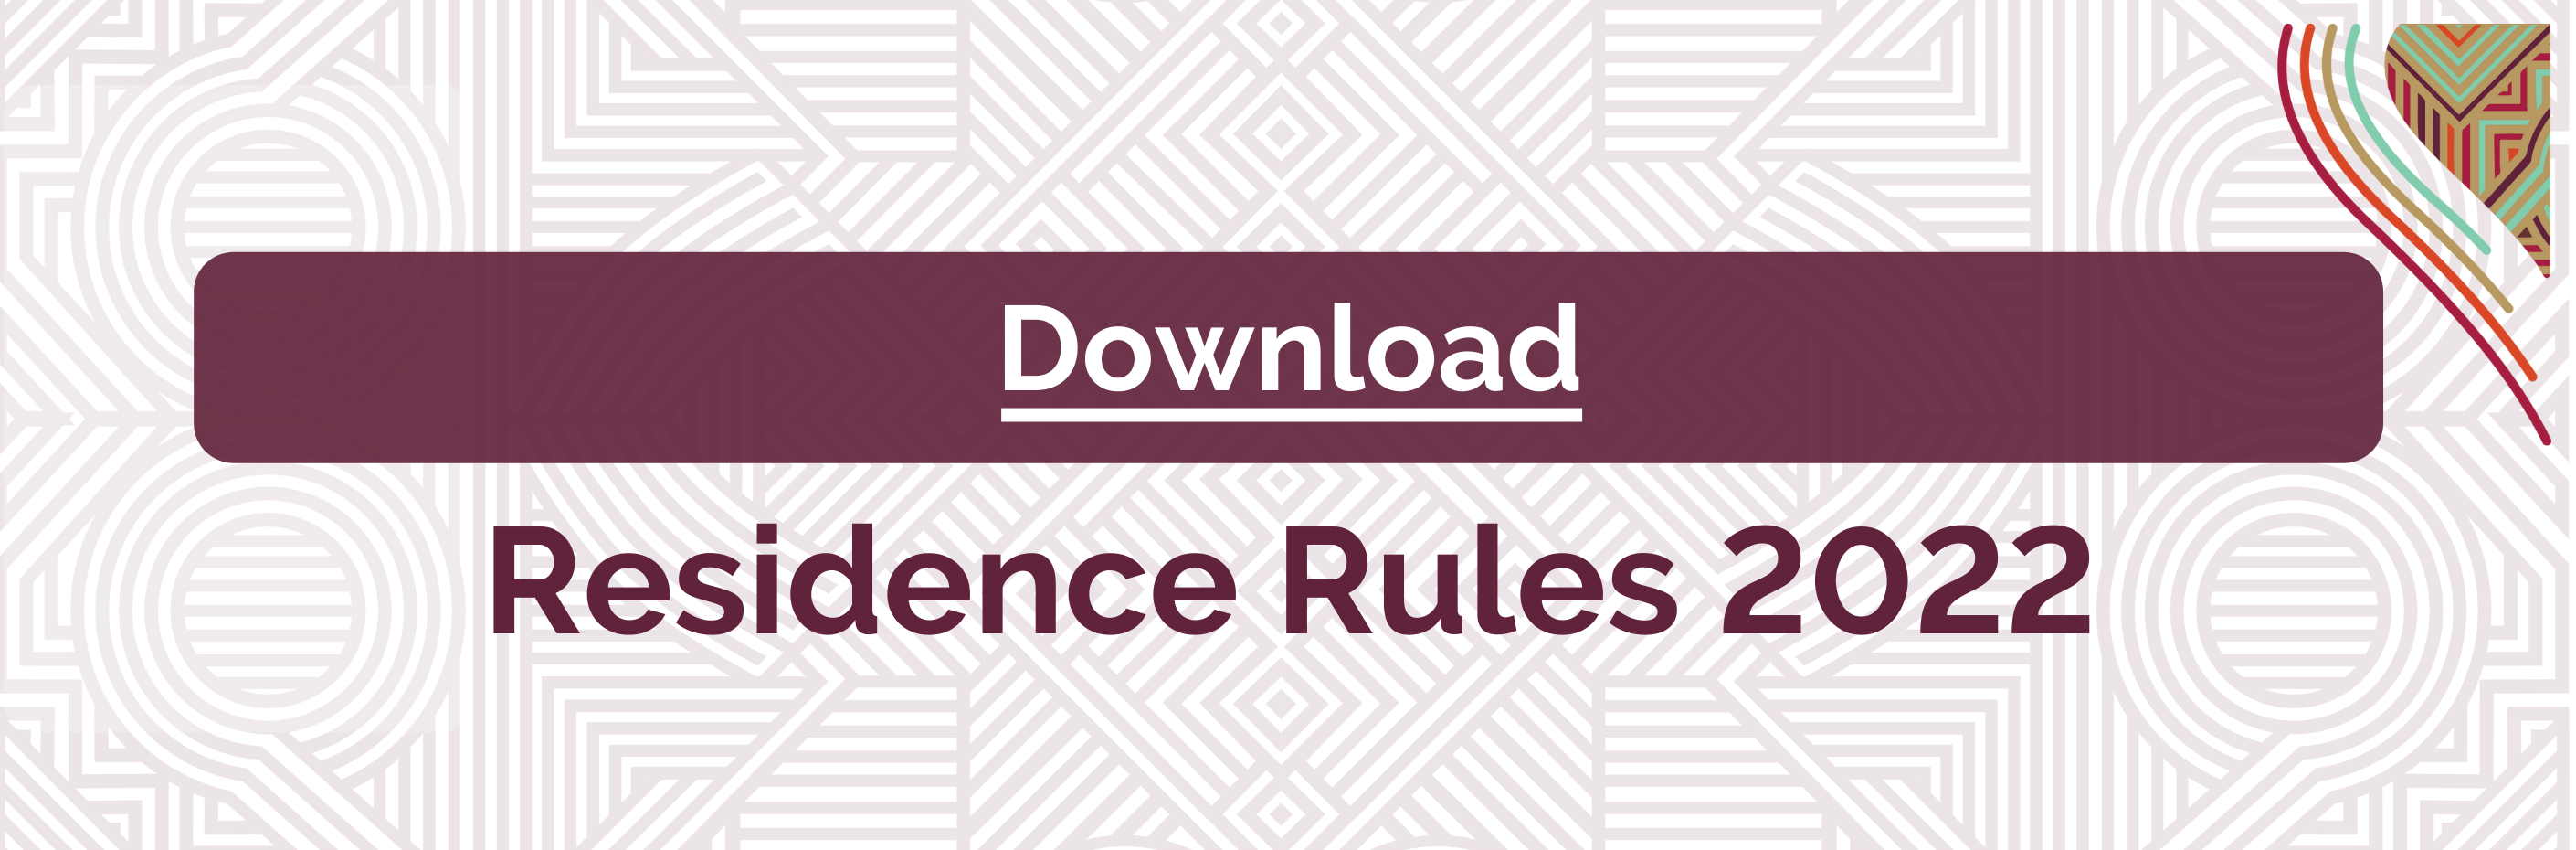 Residence Rules Web Banner.png